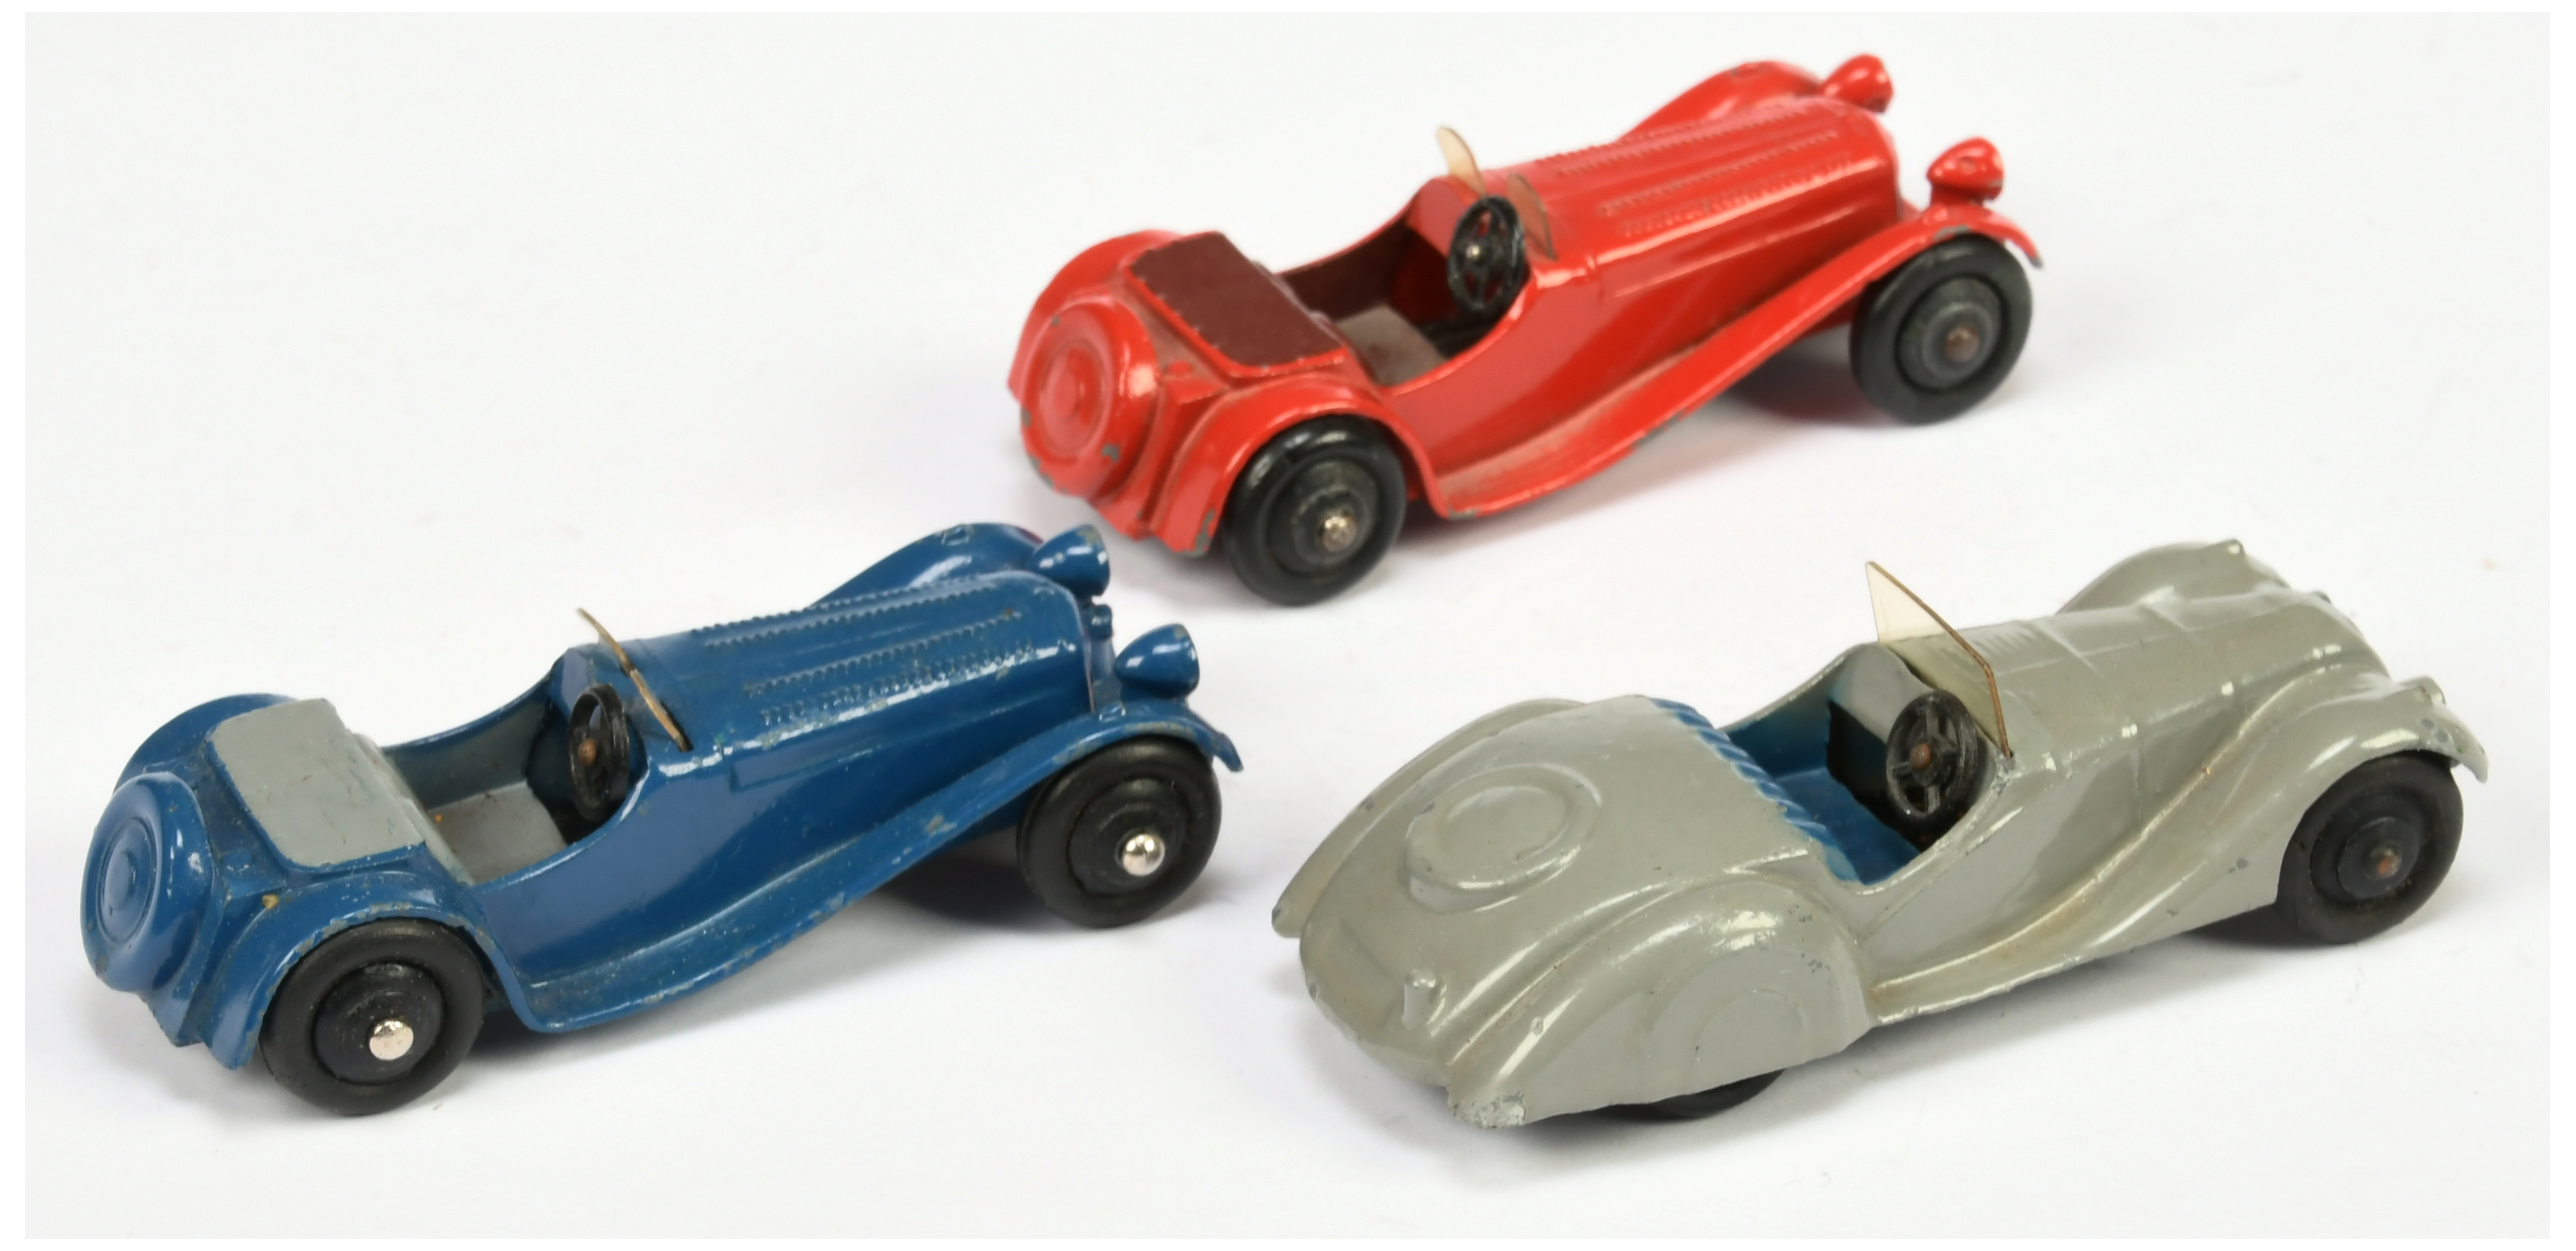 Dinky Toys 38 Series To Include (1) 38a Frazer Nash - Grey body, blue interior, (2) 36f Jaguar SS... - Image 2 of 2